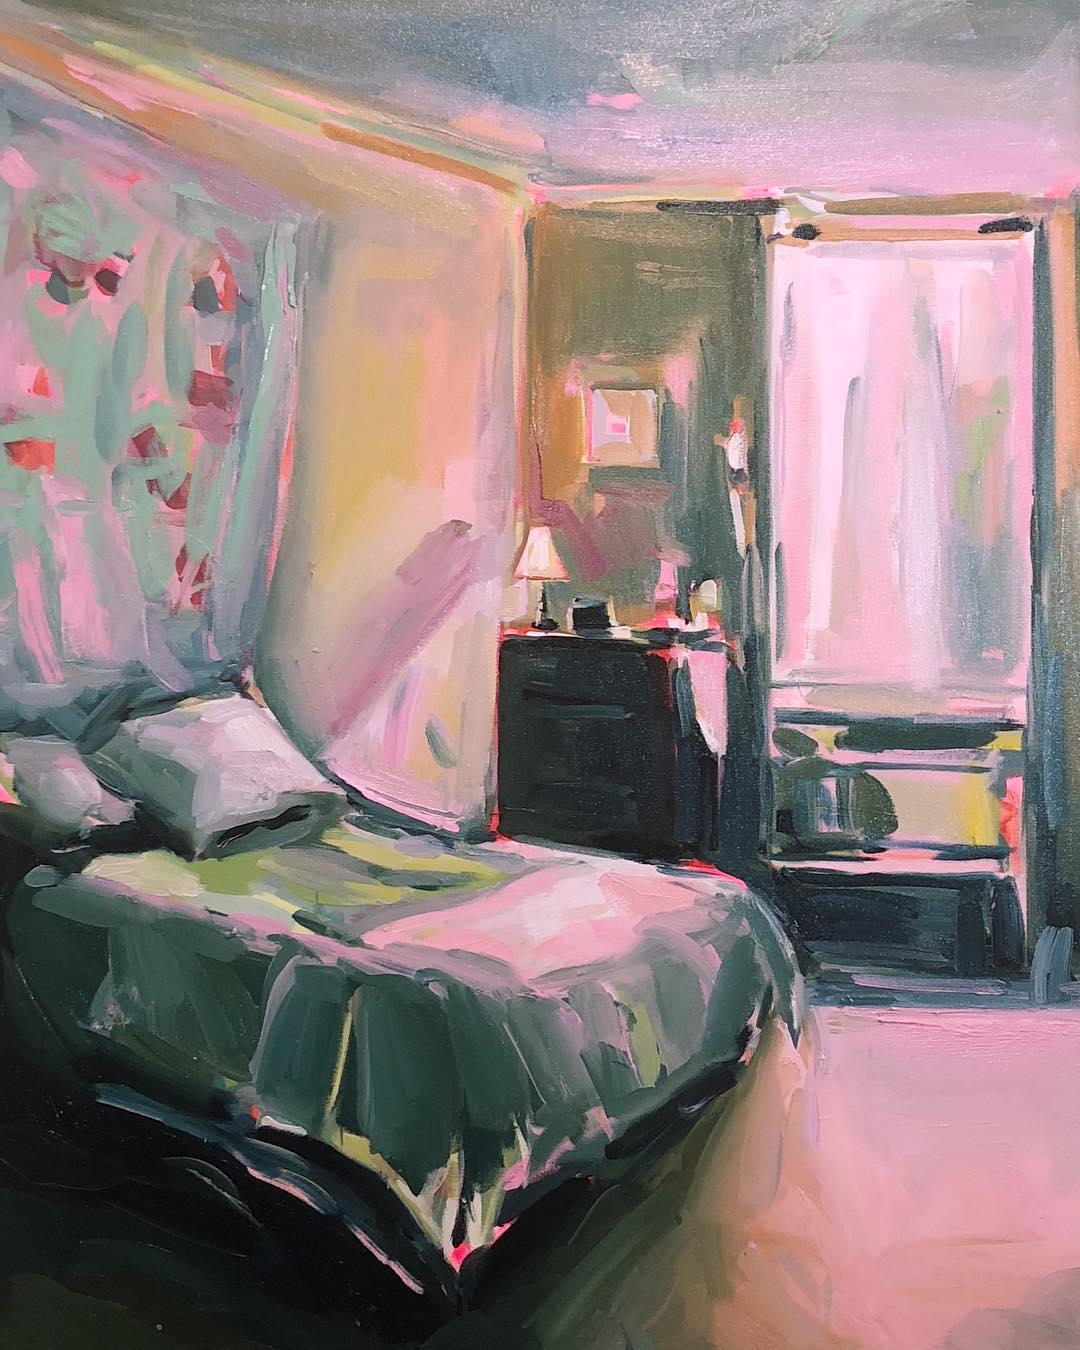 Soft Light, European contemporarystyle interior bedroom painting, Oil on canvas 